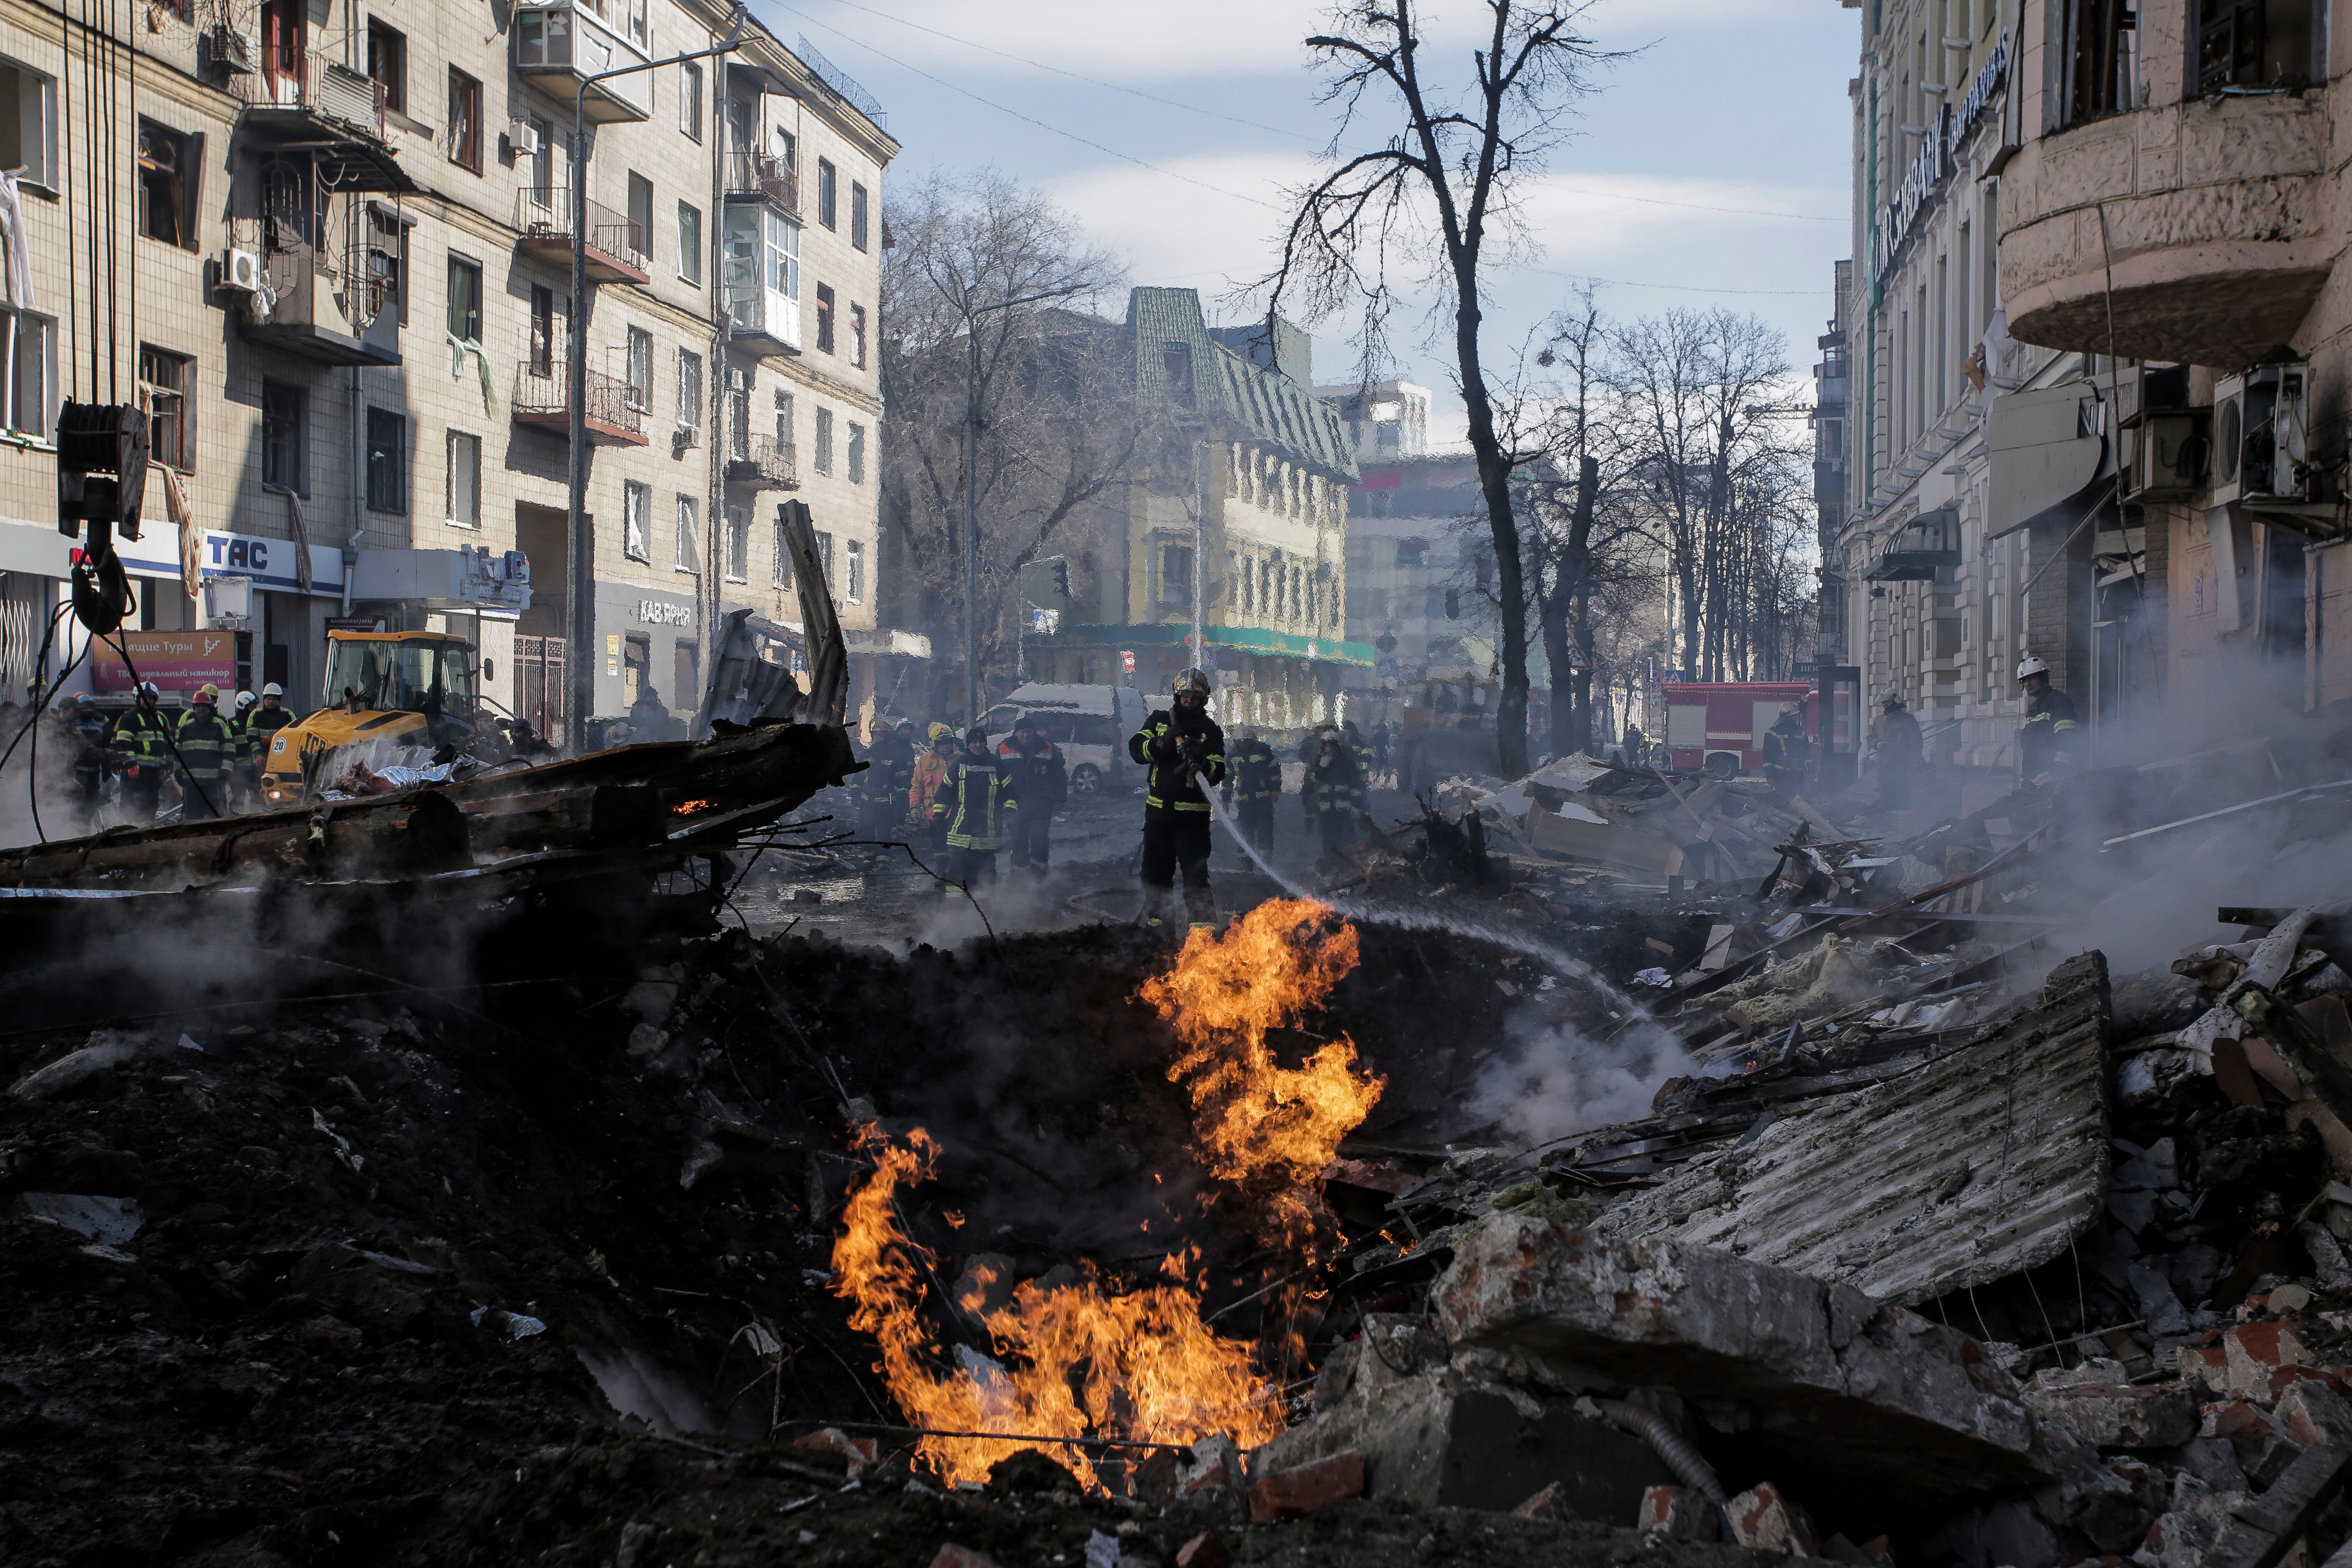 Firefighters extinguish flames outside an apartment house after a Russian rocket attack in Kharkiv, Ukraine’s second-largest city, Ukraine, Monday, March 14, 2022. (AP Photo/Pavel Dorogoy)